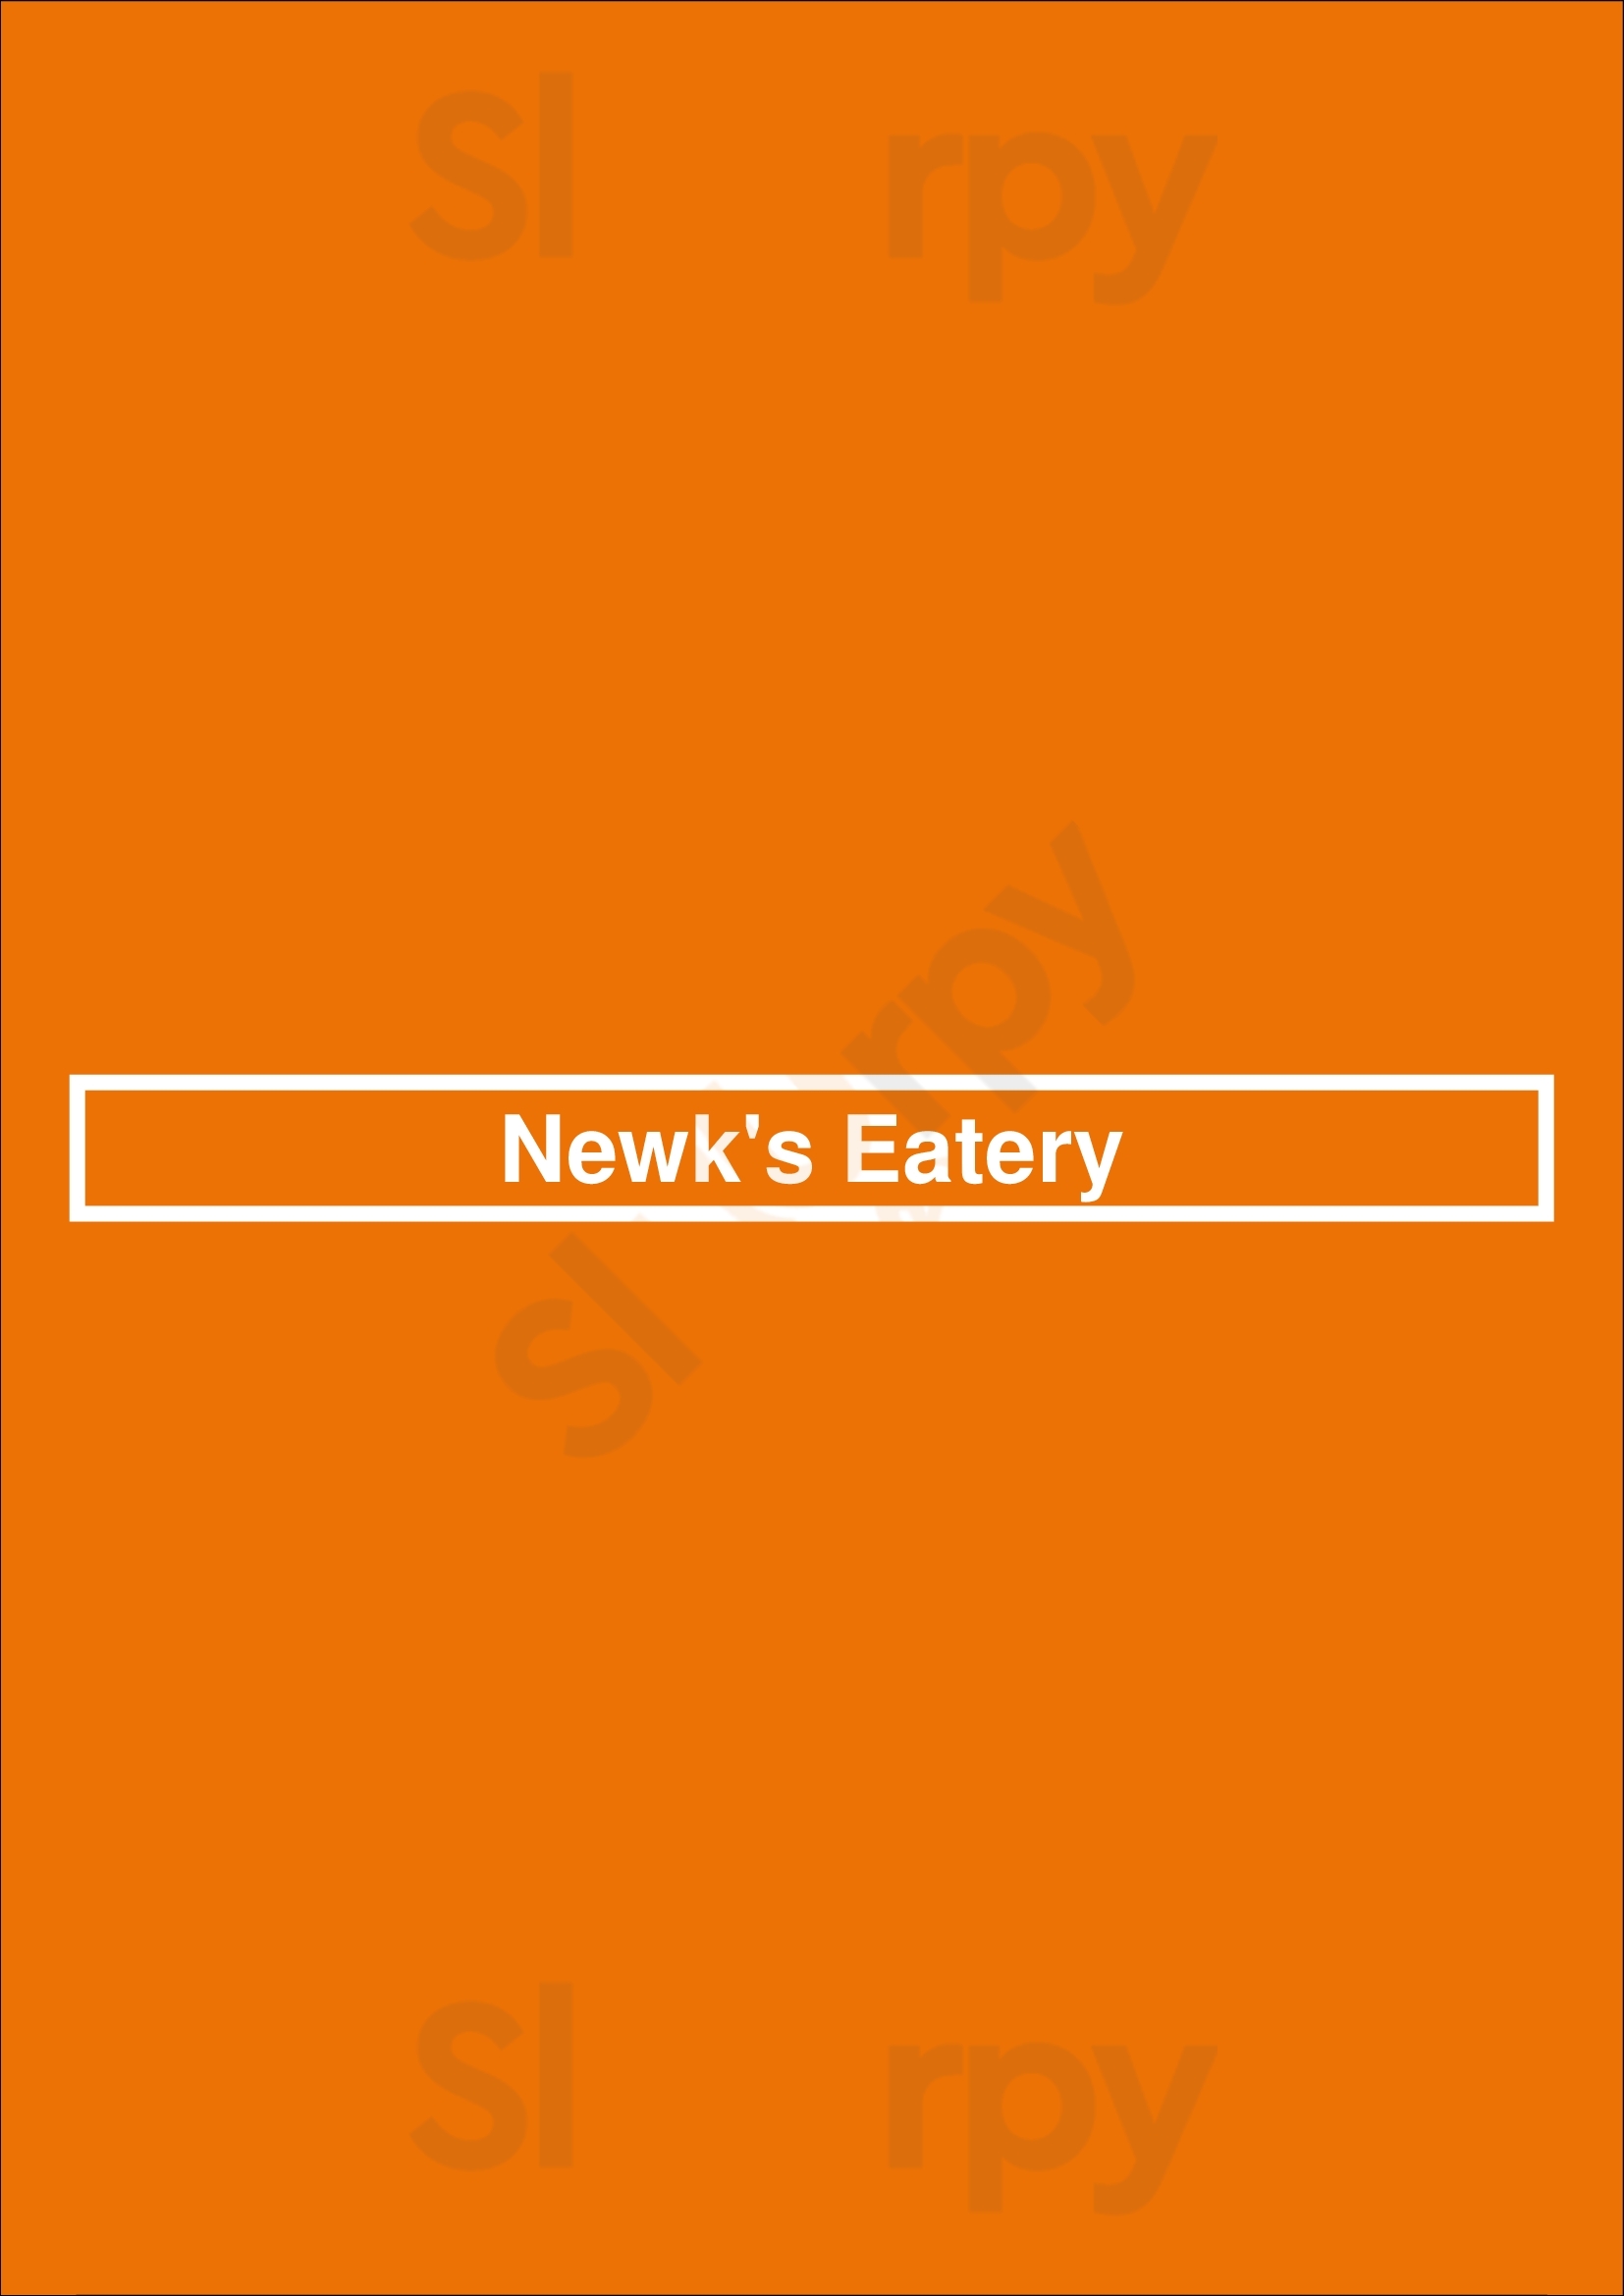 Newk's Eatery Knoxville Menu - 1